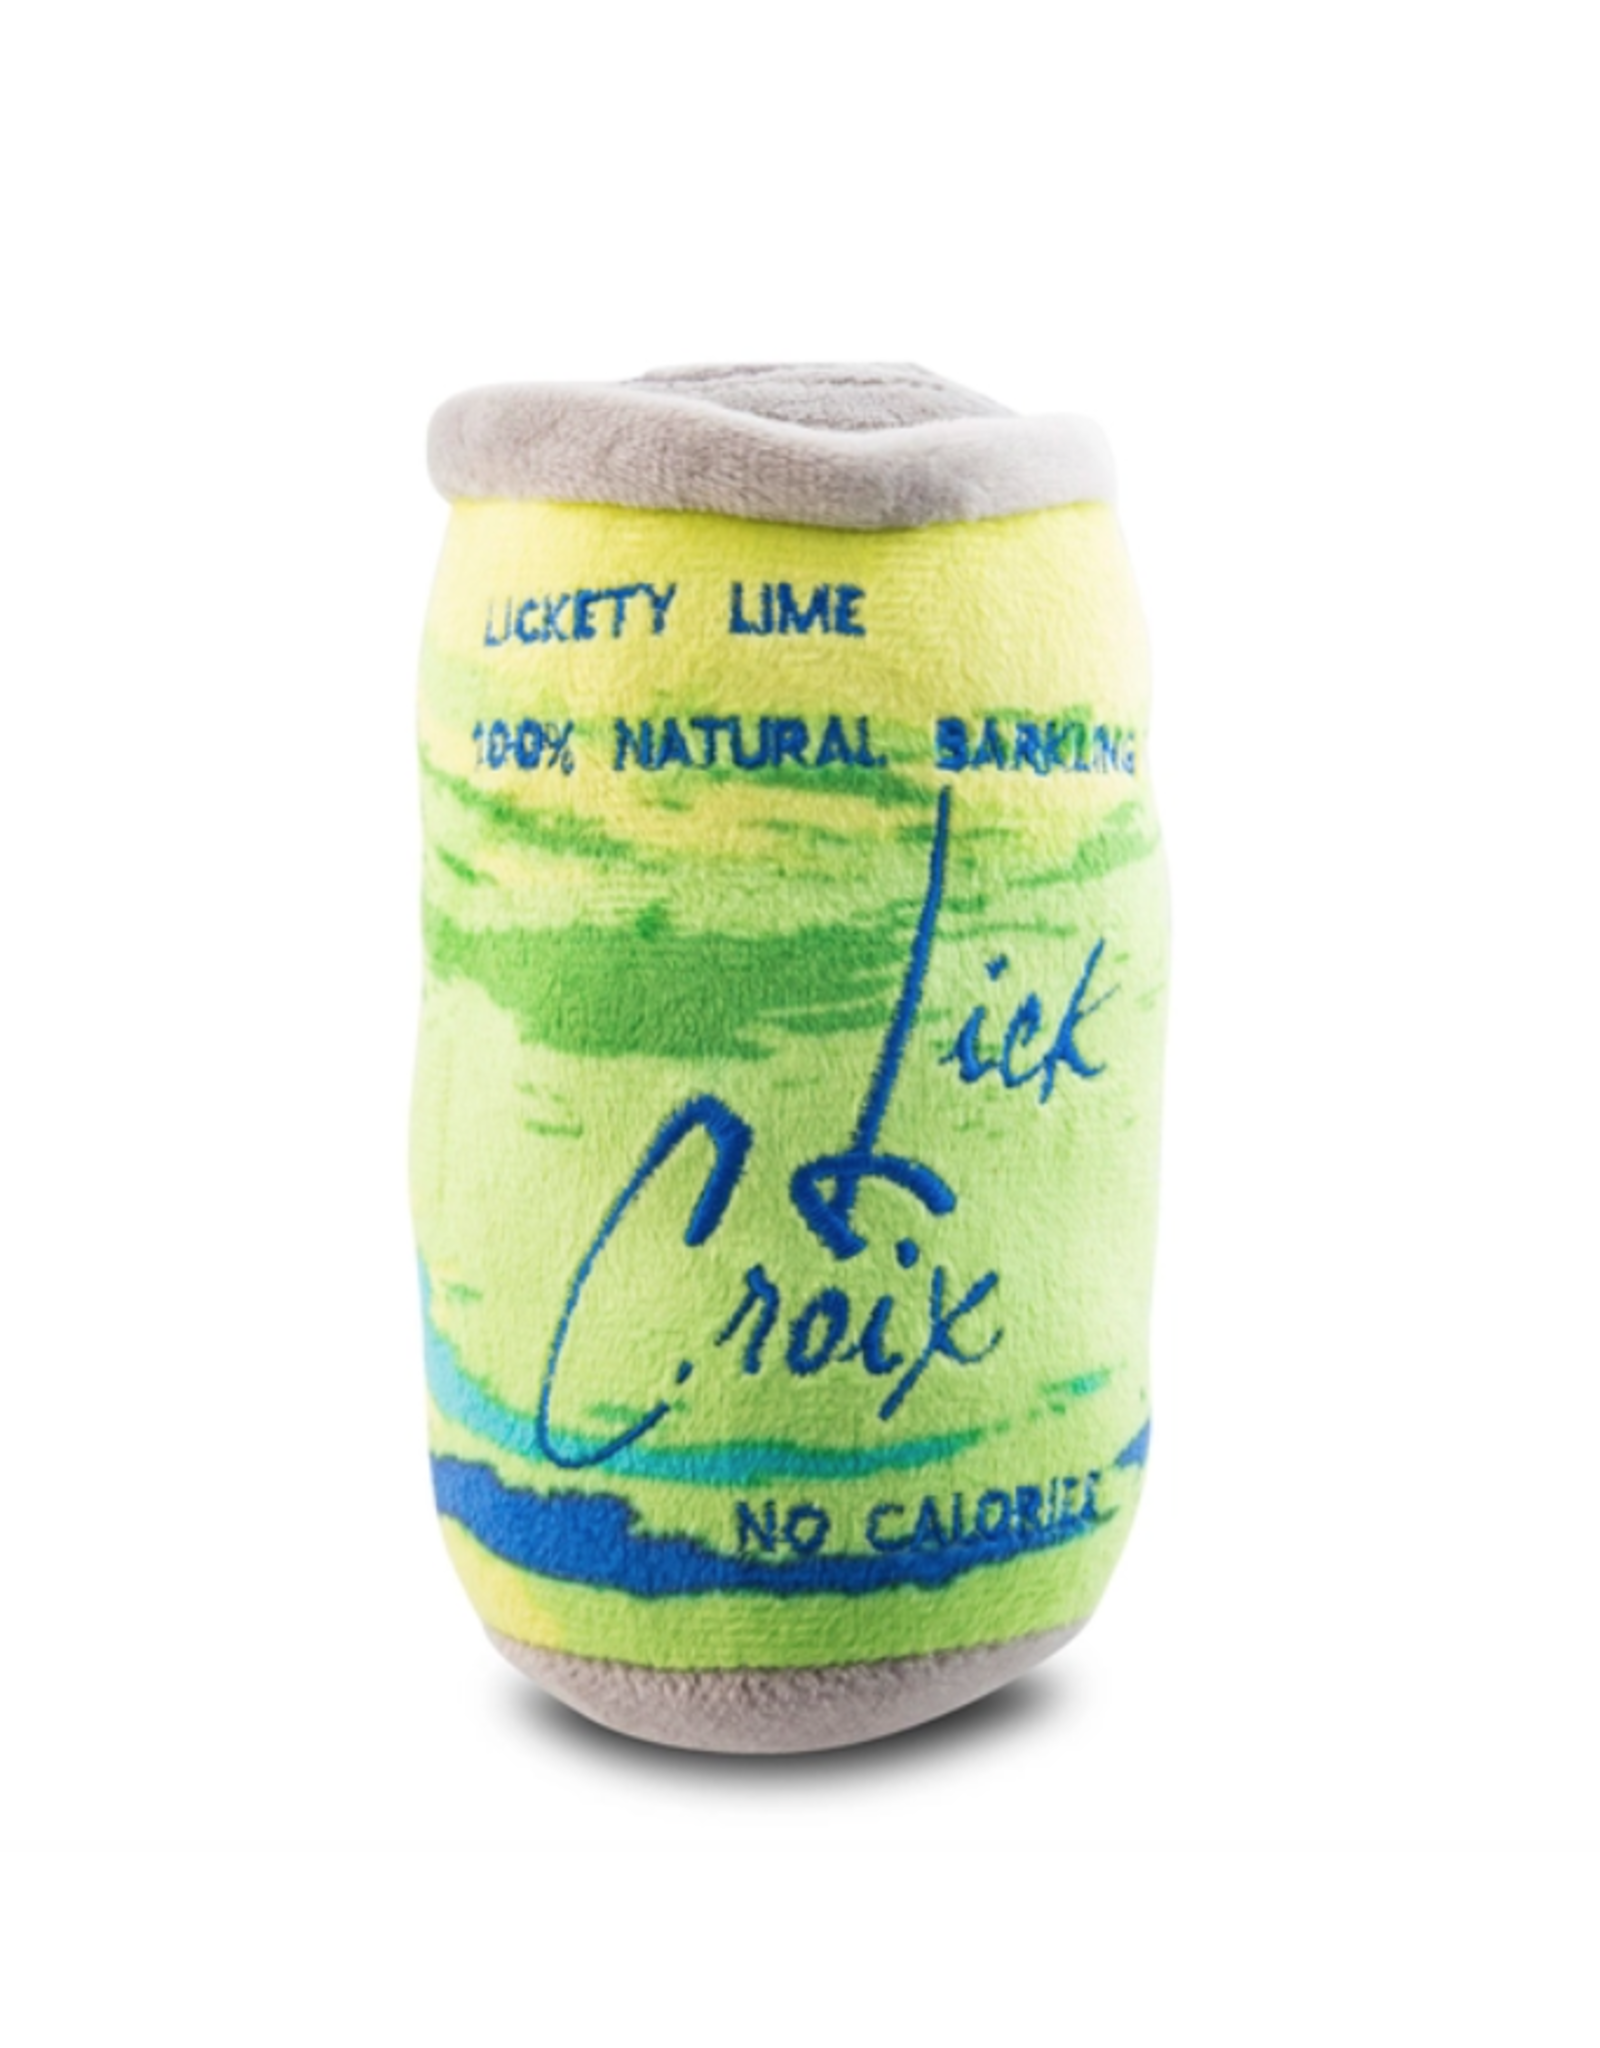 Haute Diggity Dog LickCroix Lickety Lime Barkling Water - Large